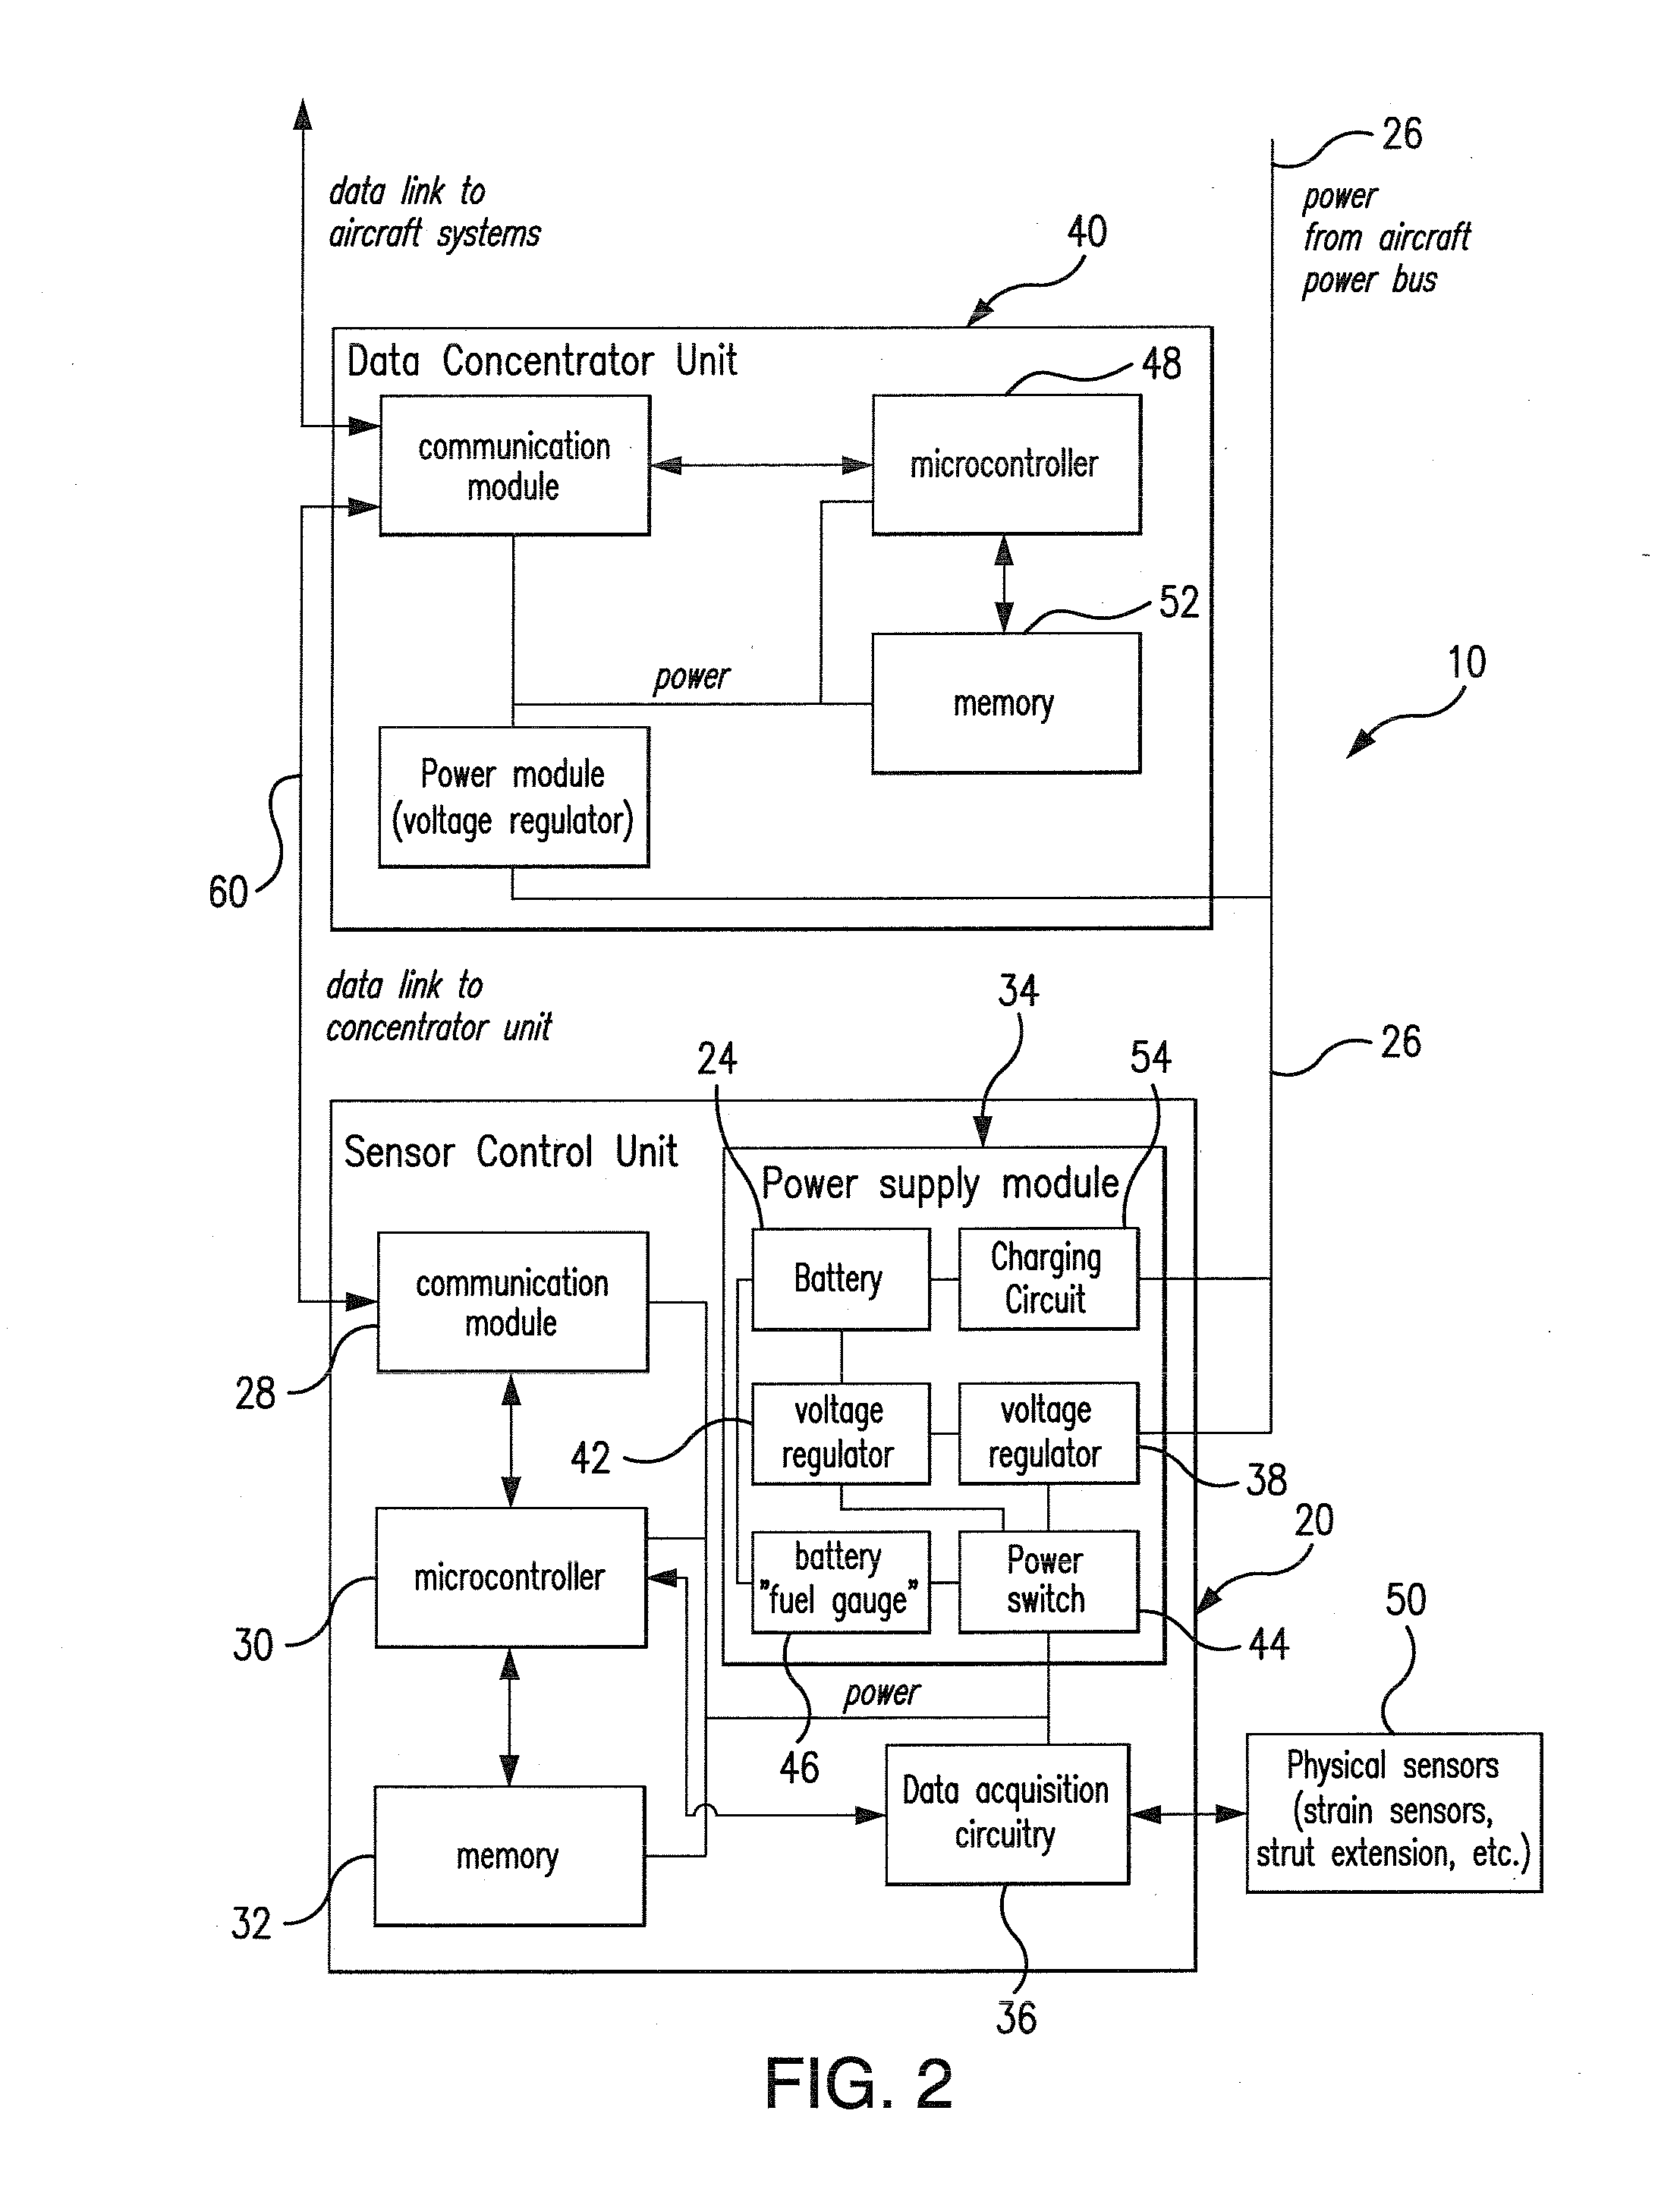 Systems and methods for energy conserving wireless sensing with situational awareness